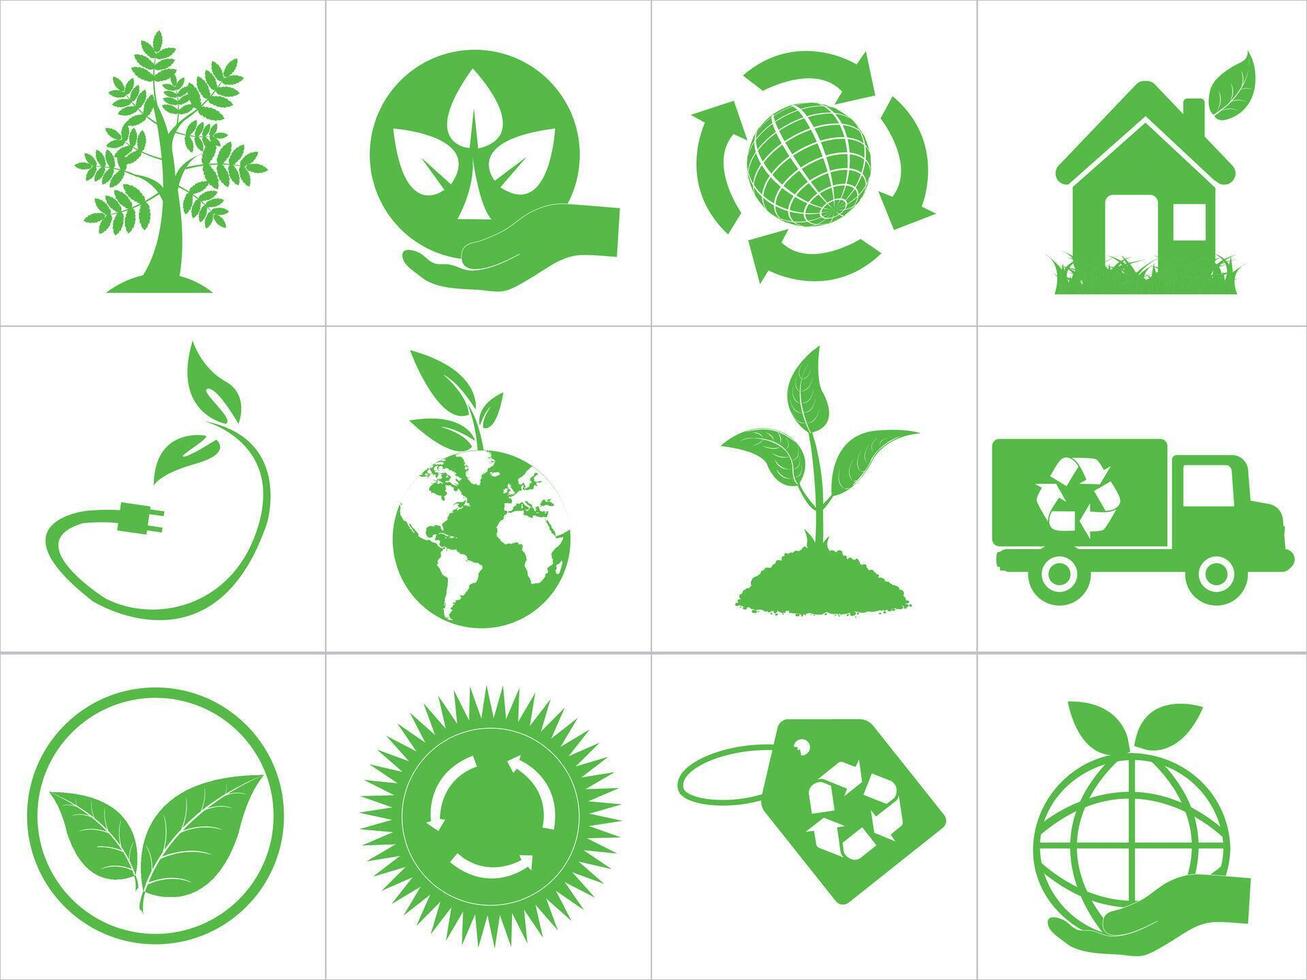 Set of ecology icons. Environment, sustainability, nature, recycling, renewable energy, electric car, eco friendly, forest, green symbol. Vector collection of solid icons.